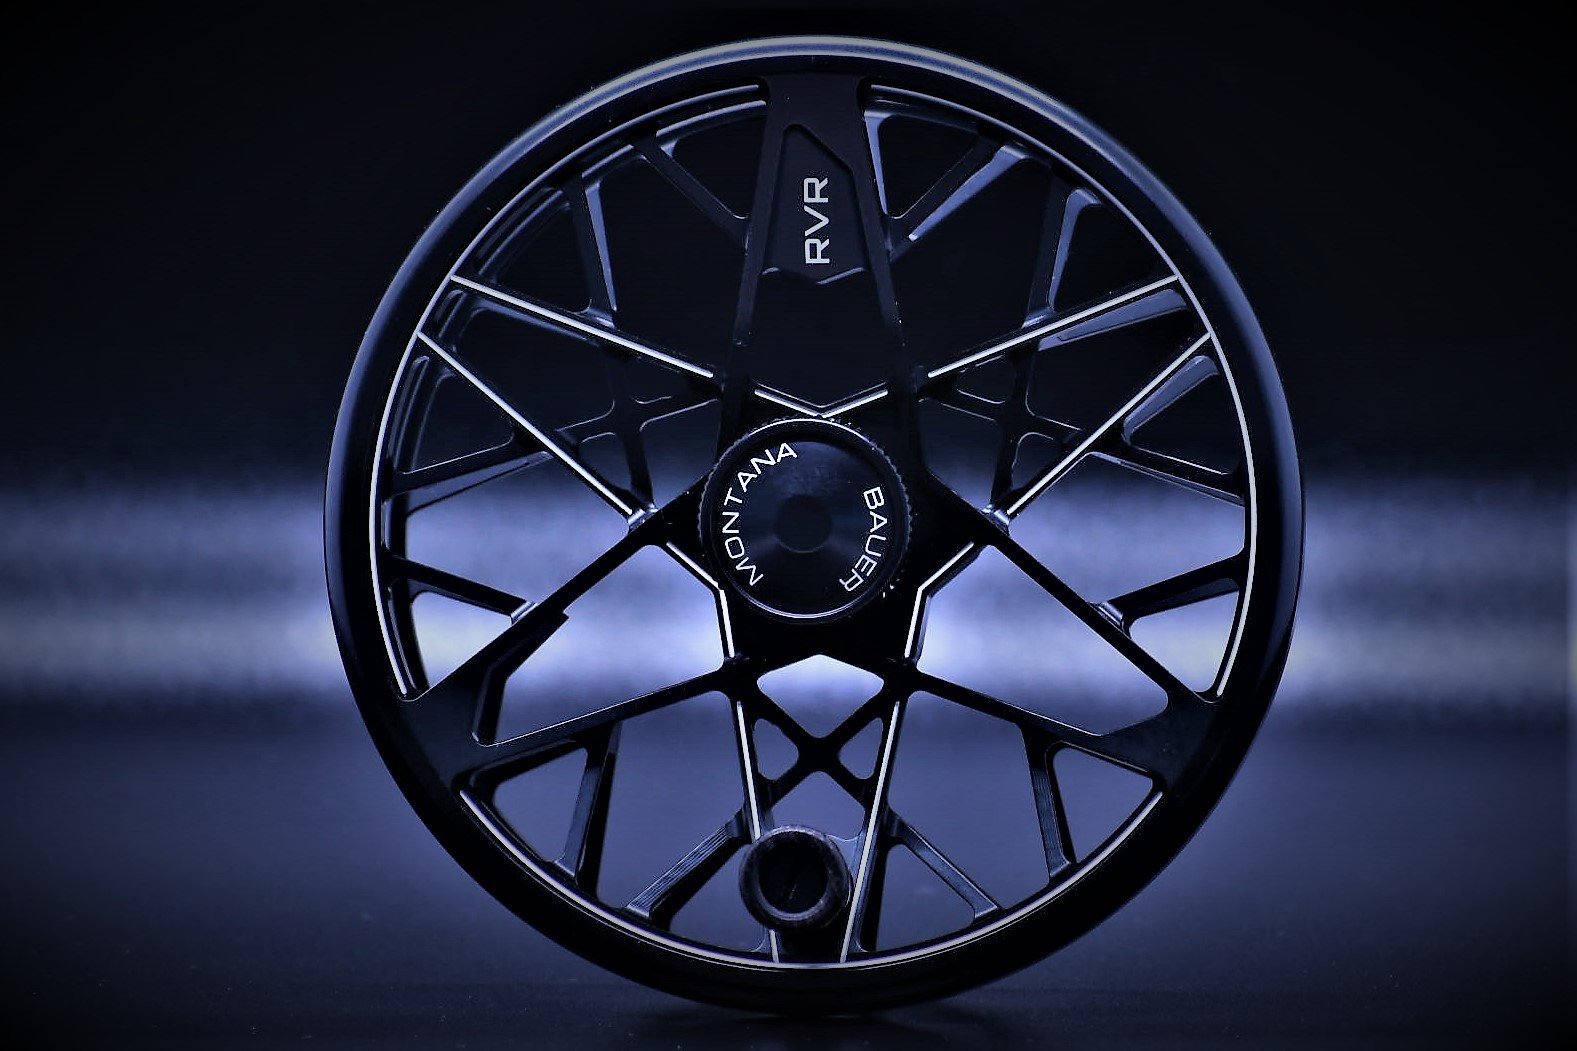 New Bauer RVR Fly Reels for Trout: Video - Fly Fishing